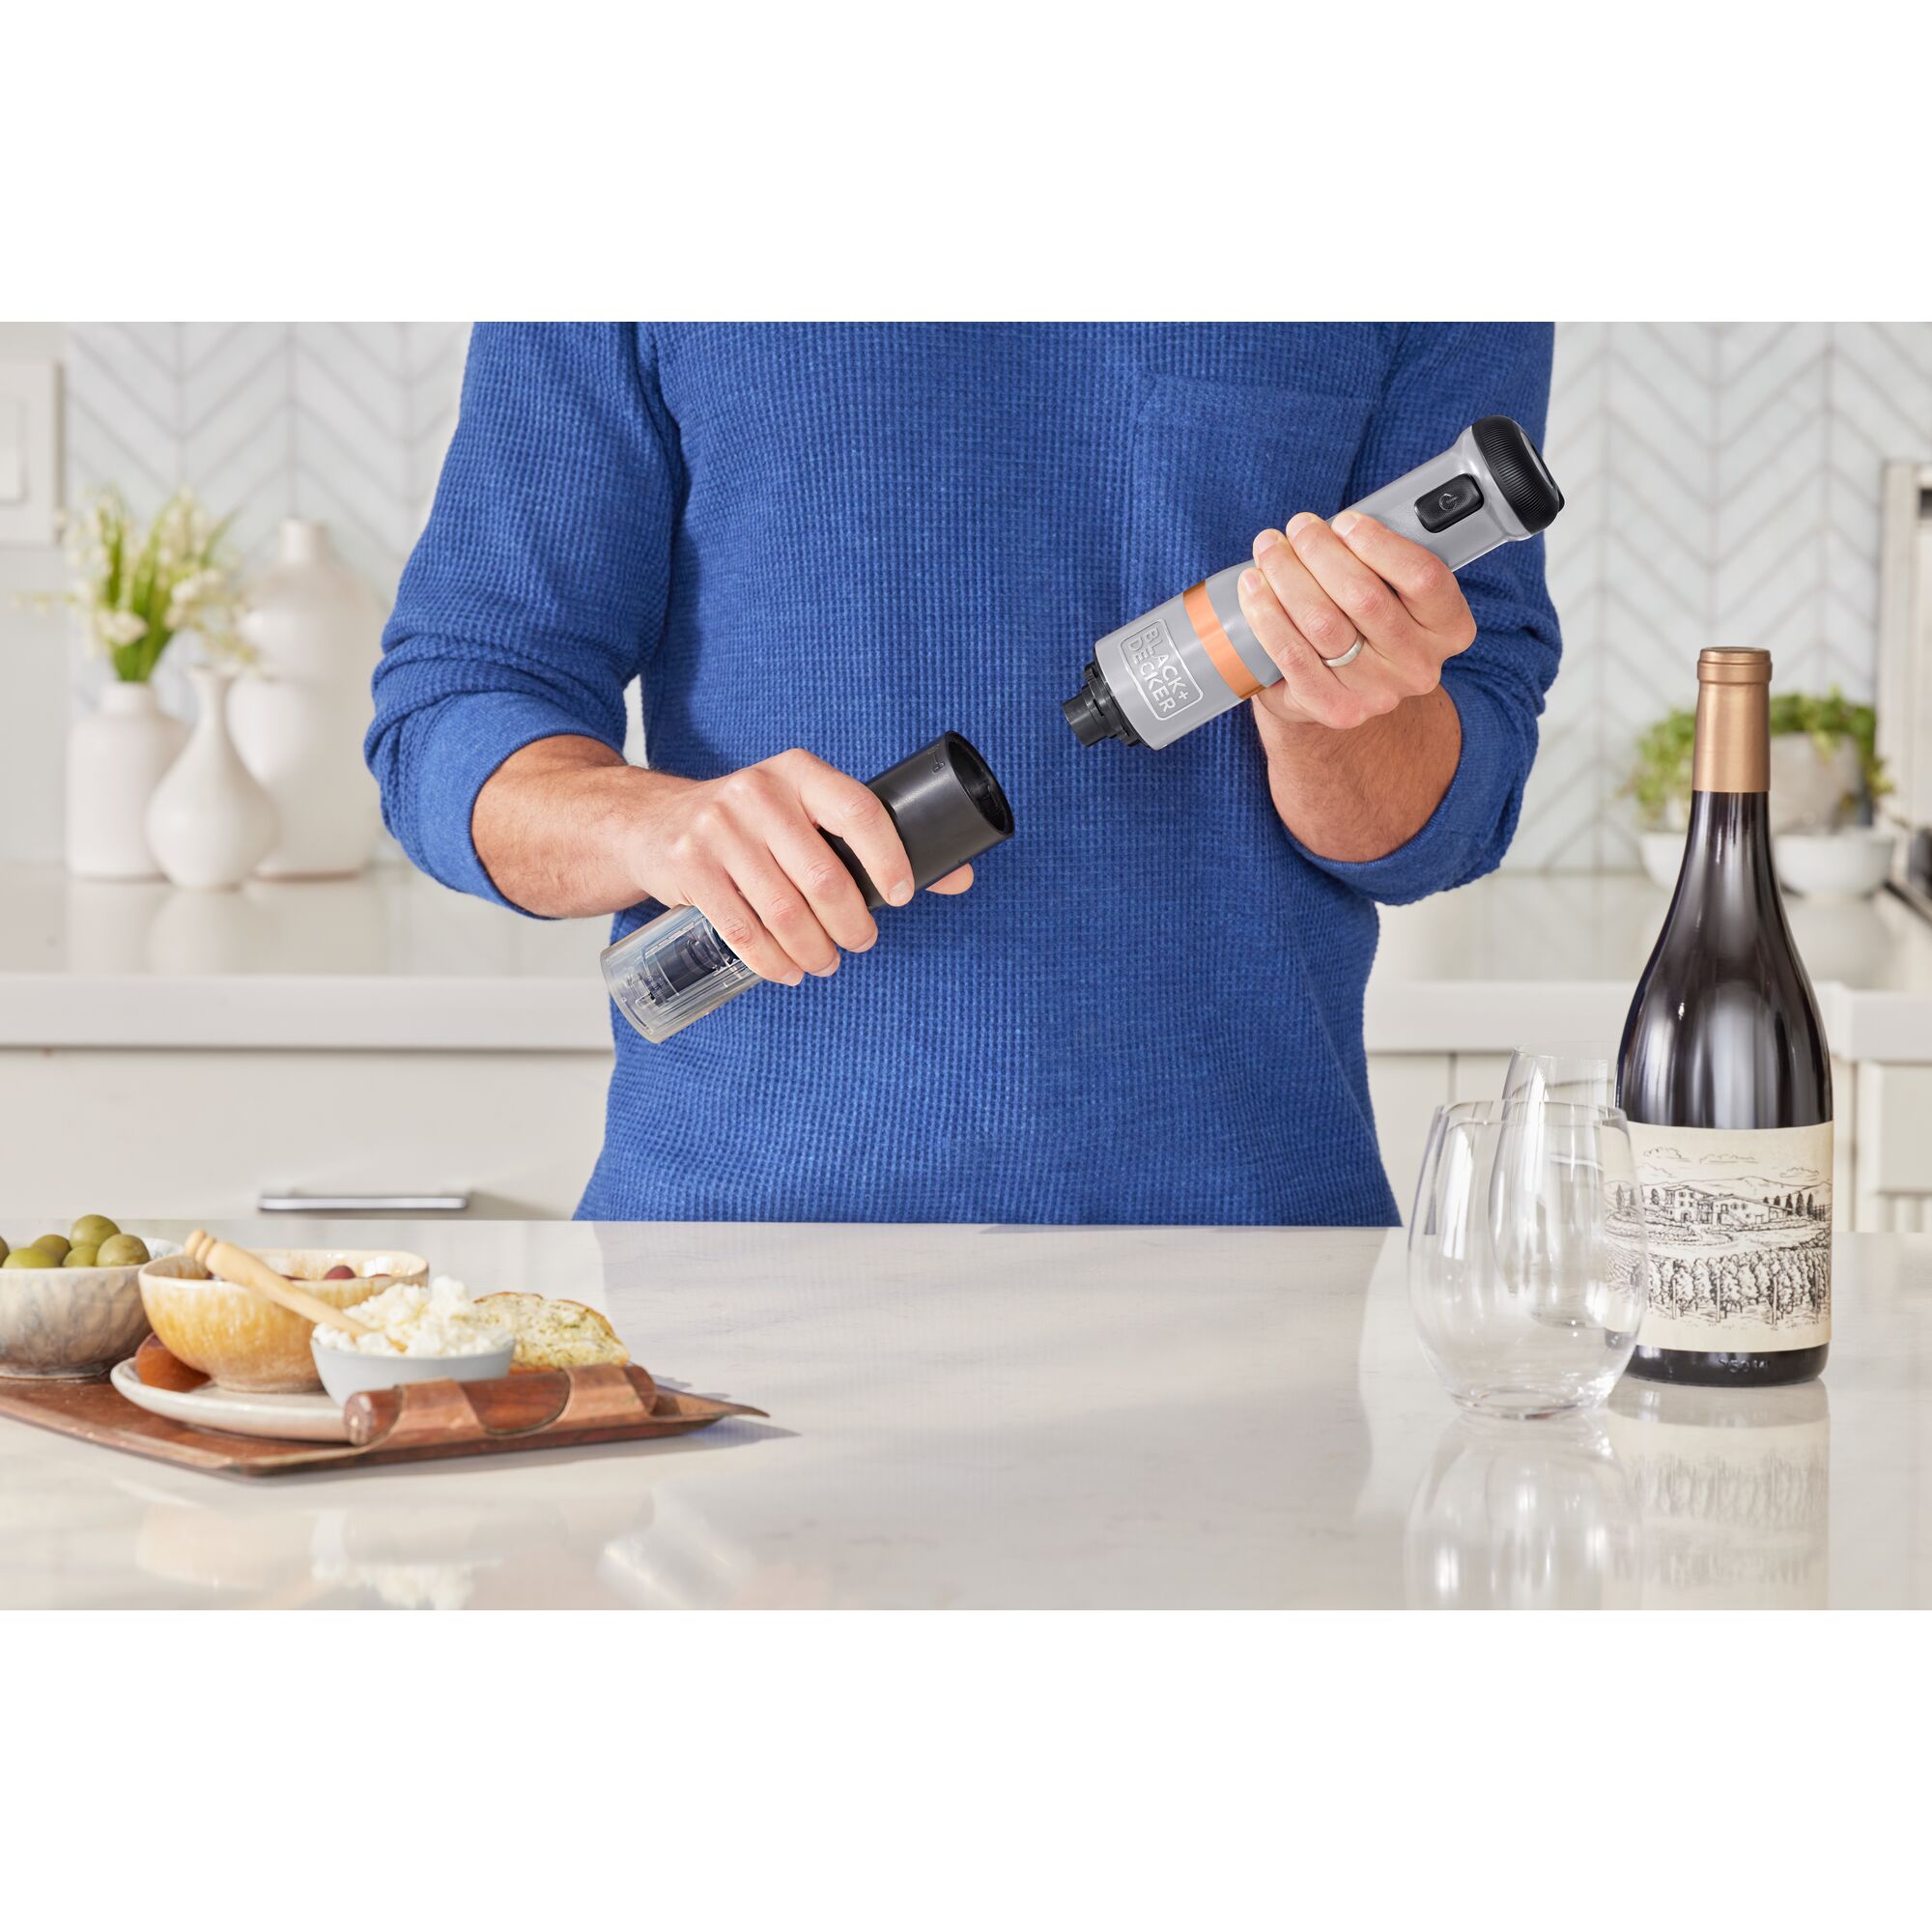 Talent showing how to attach the BLACK+DECKER kitchen wand wine opener attachment to the grey power unit